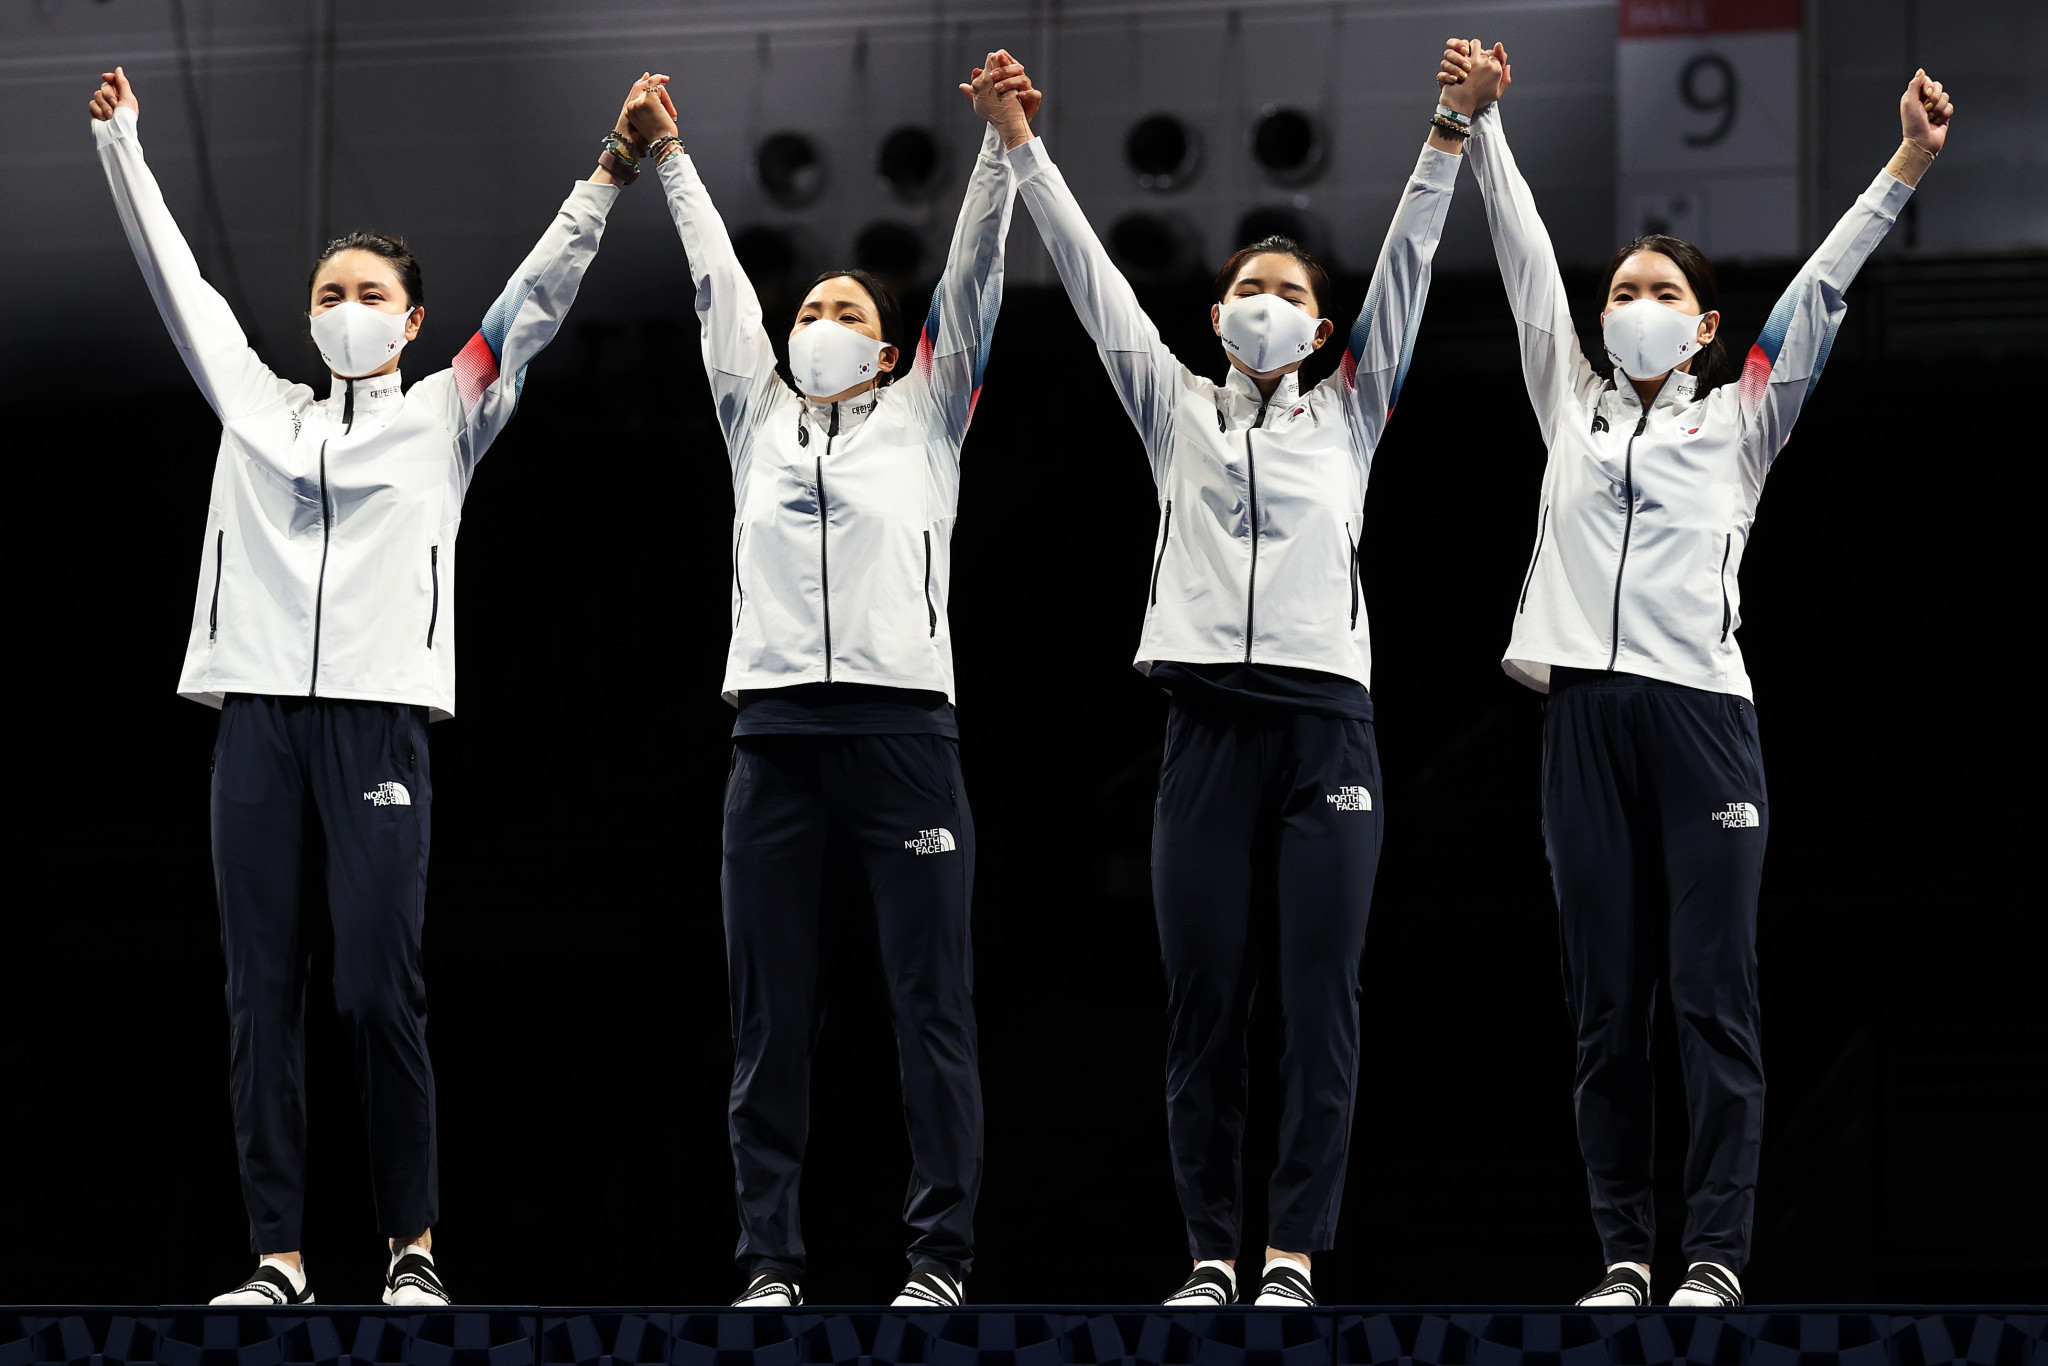 Team titles go way of South Korea at Fencing World Championships